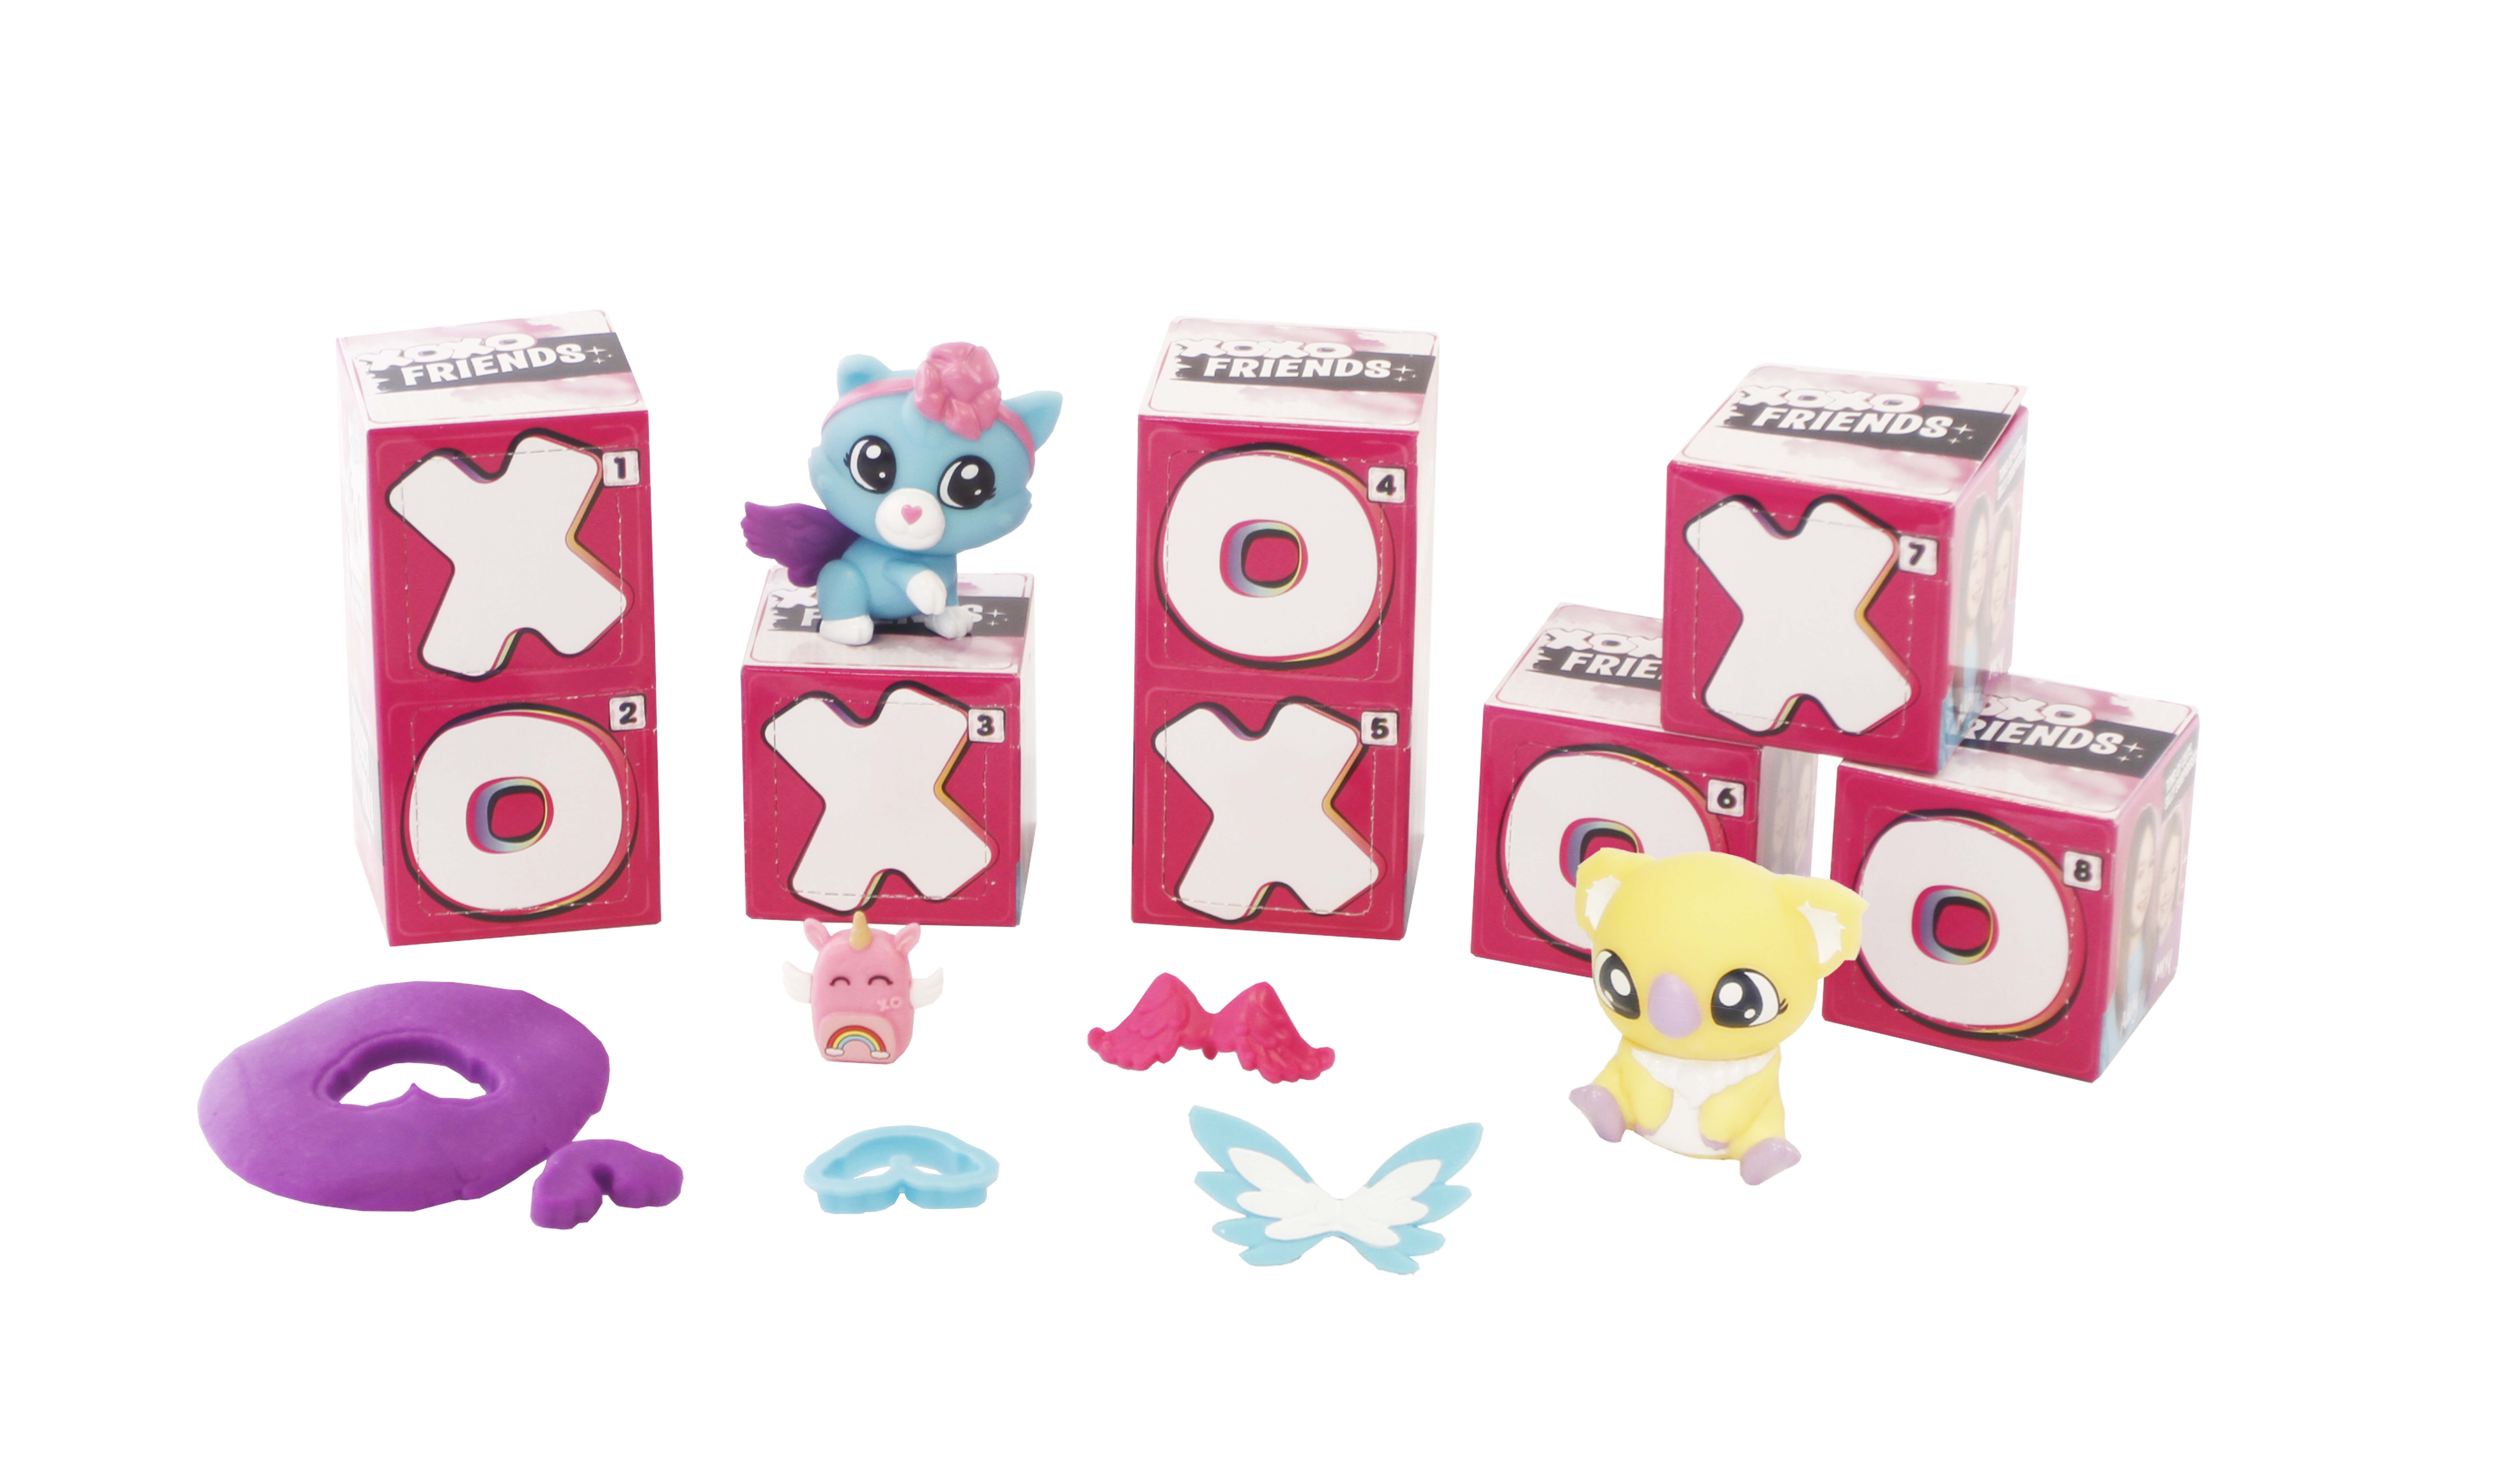 Tic Tac Toy XOXO FRIENDS Multi Pack Surprise, Pack 1 of 12 